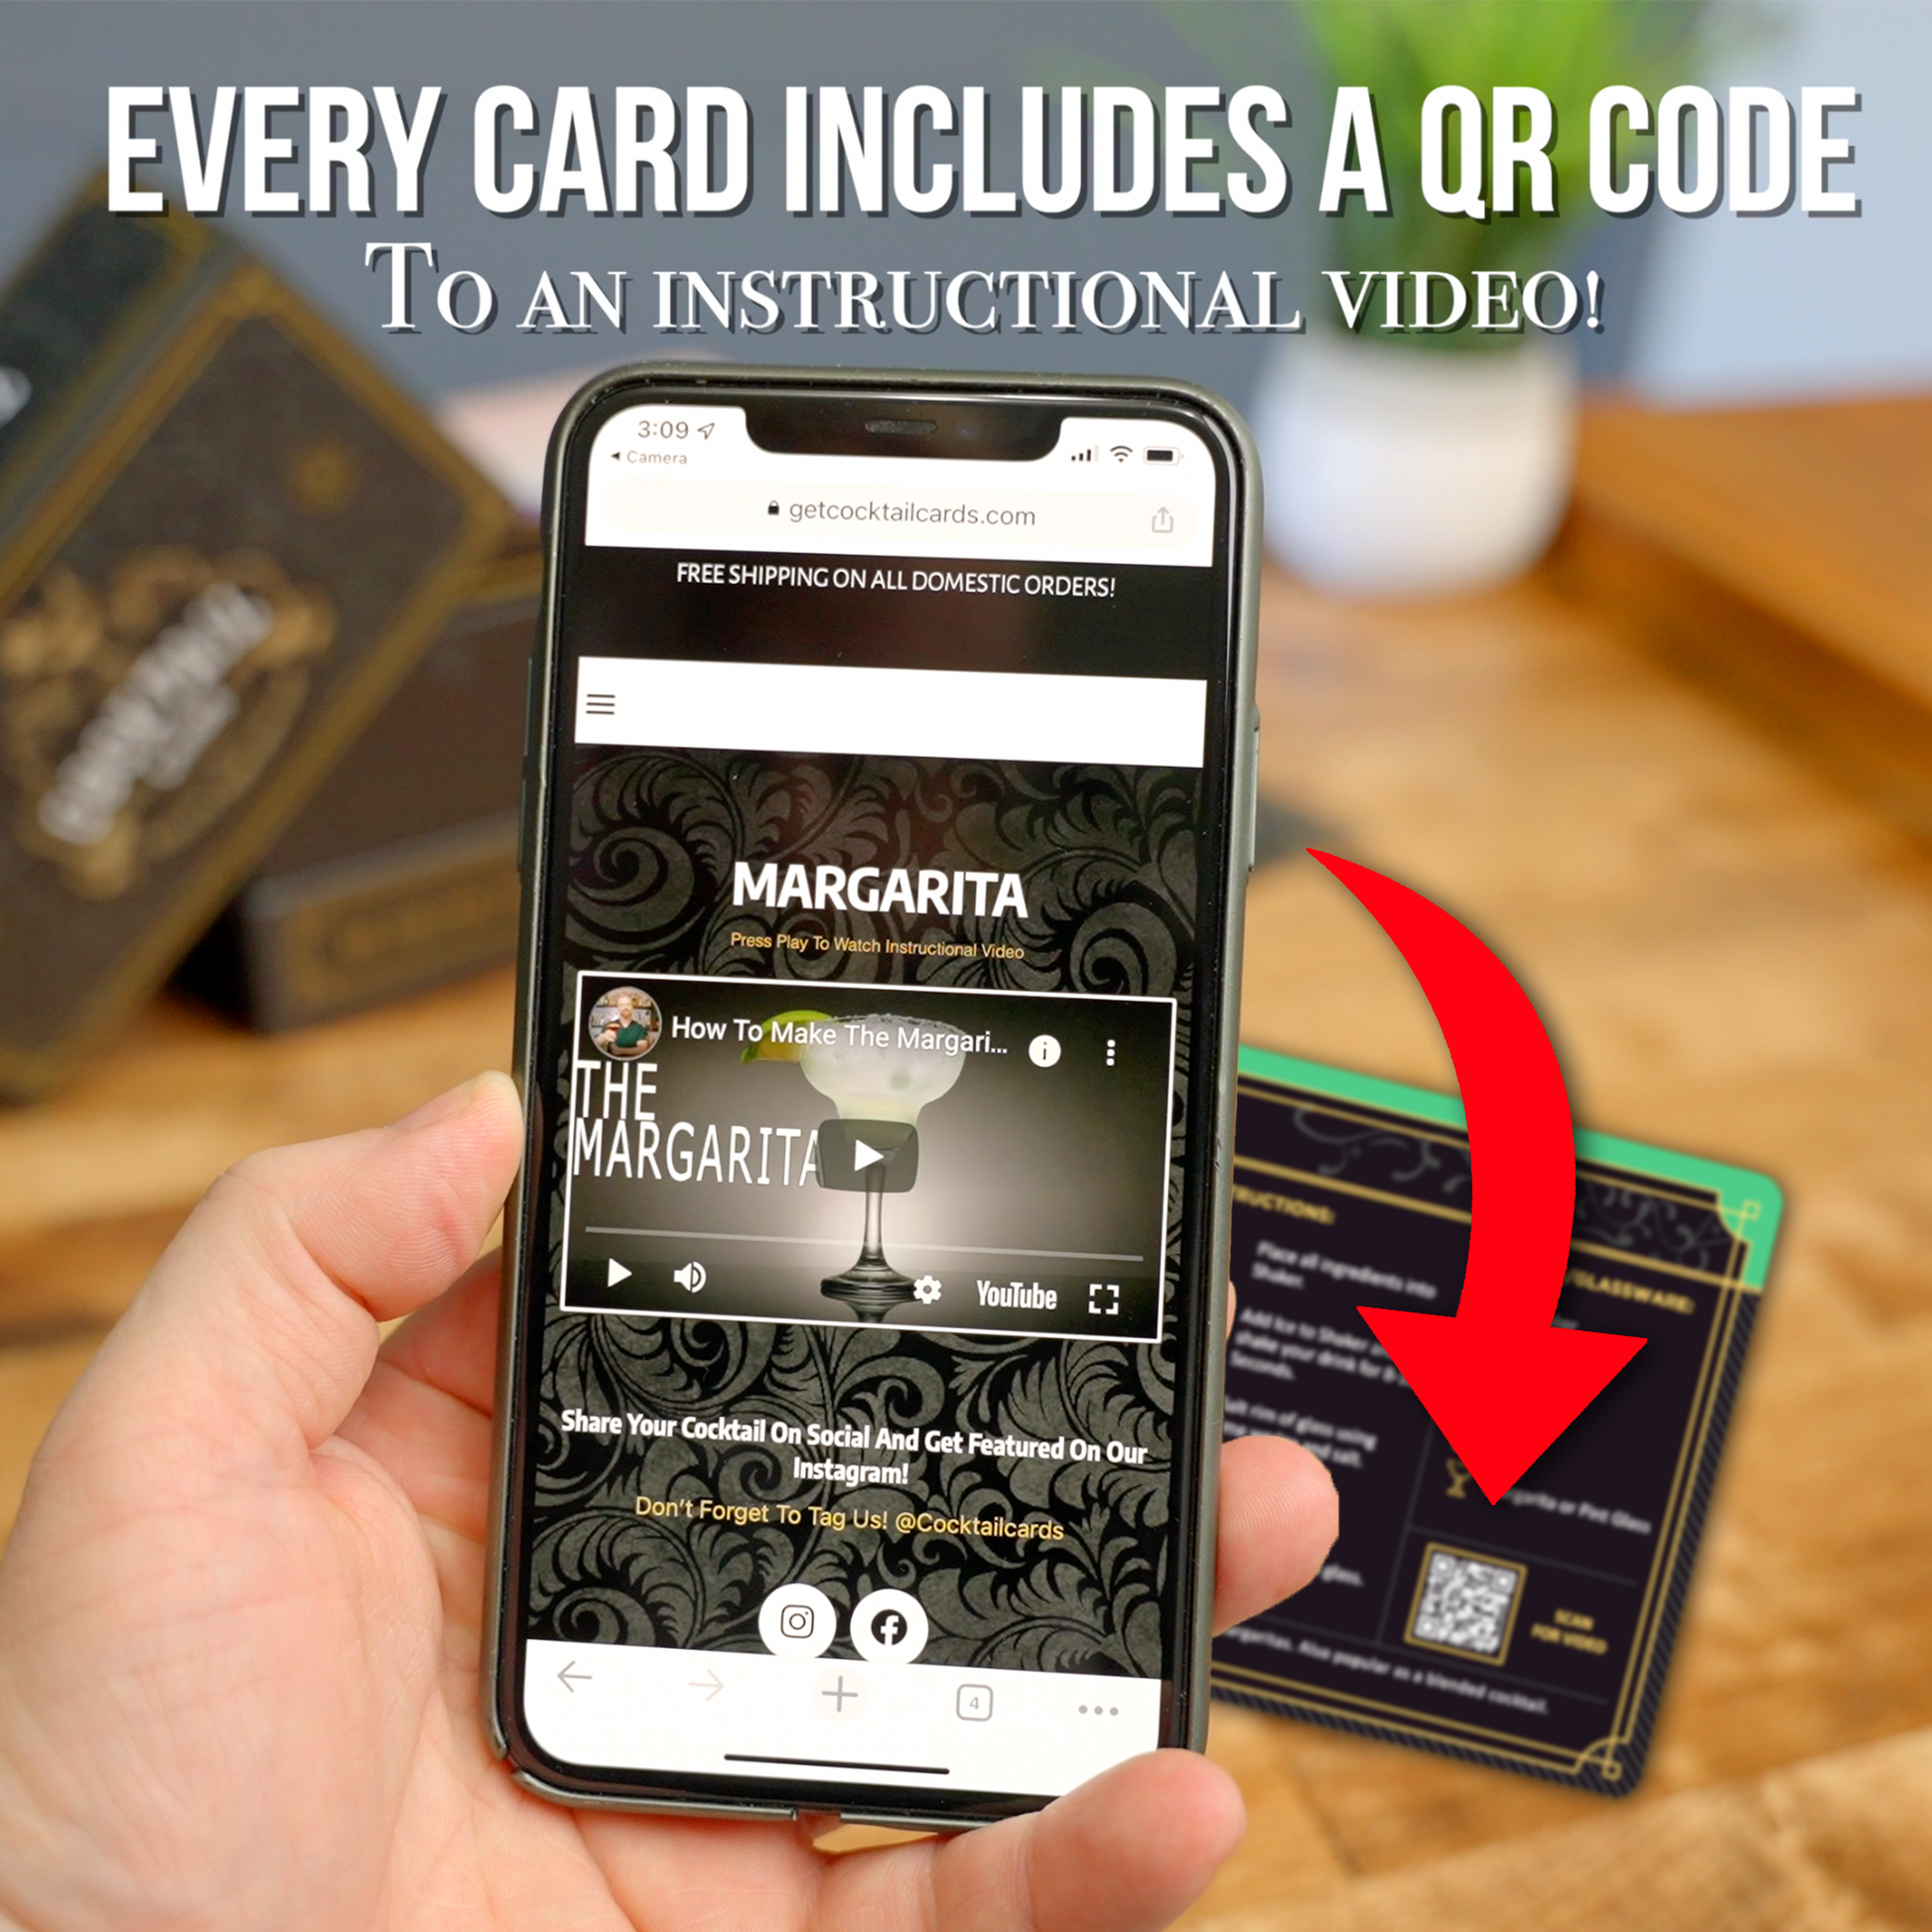 Every card includes a QR code where you can point your phone and tablet at the card and the corresponding video will start to play on your device.